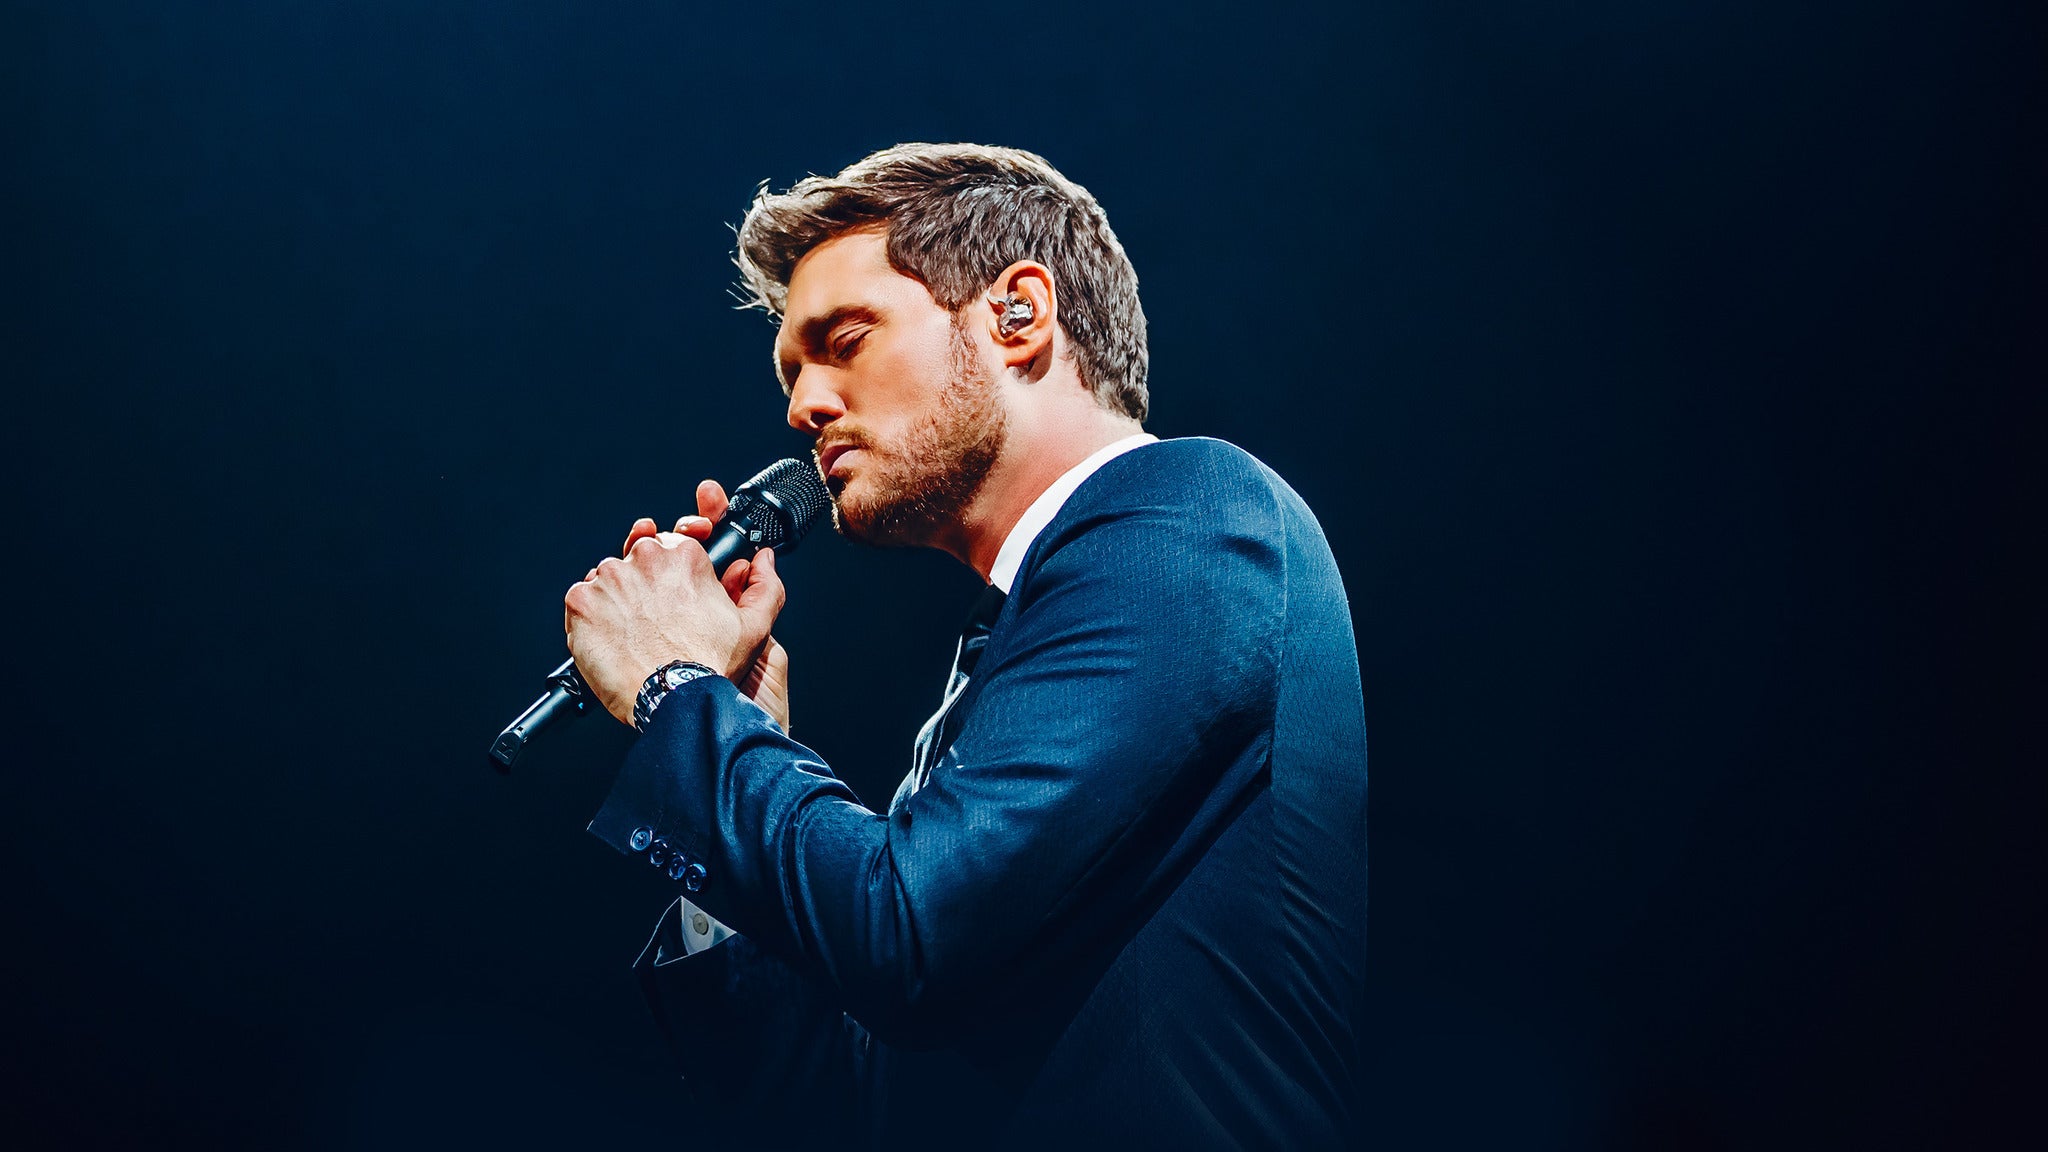 Michael Bublé “AN EVENING WITH” - Stage